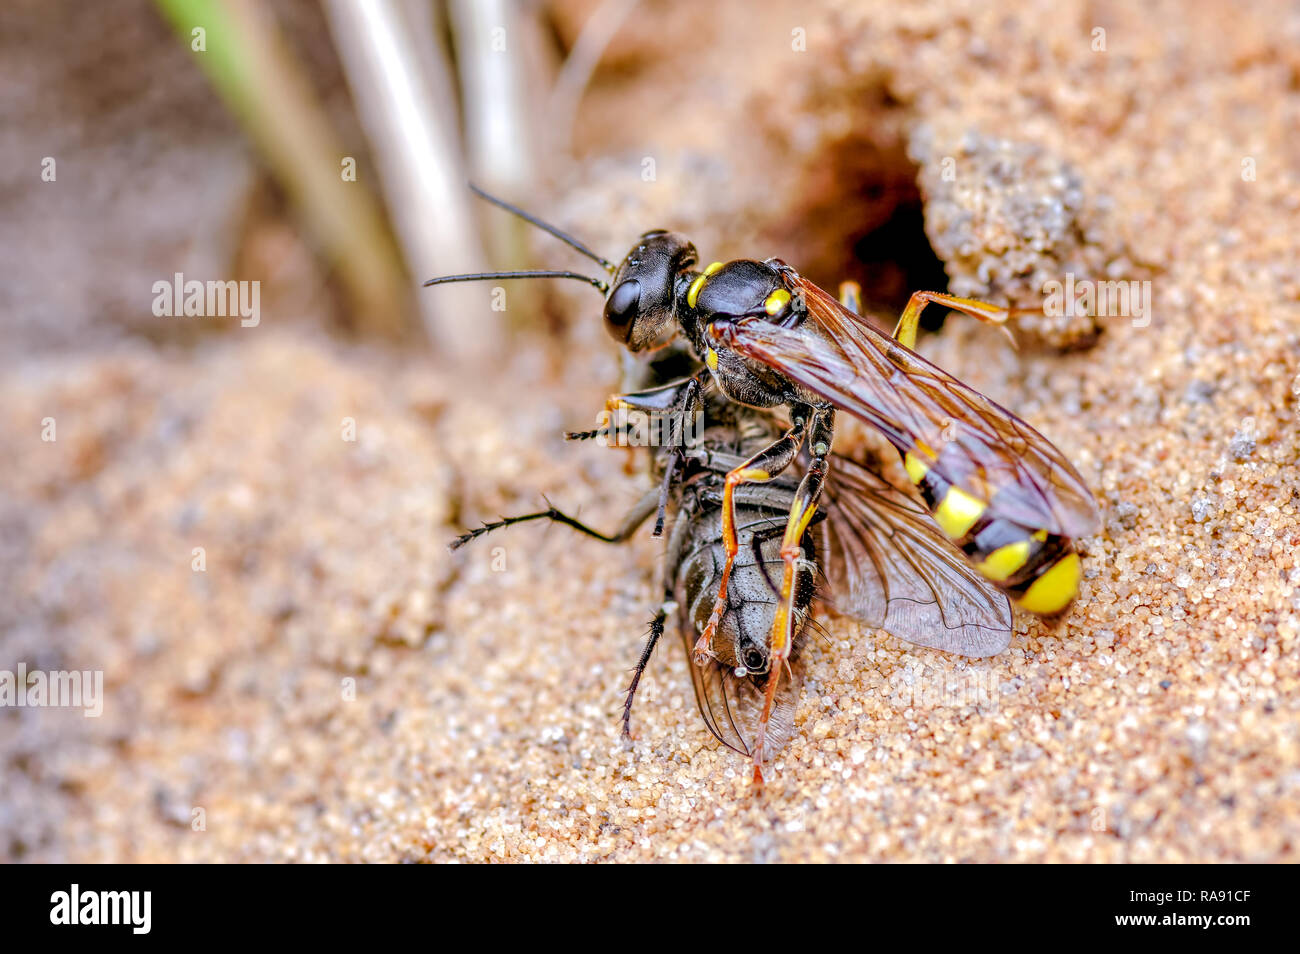 This is the field digger wasp, Mellinus arvensis in our rear garden, September. The wasp hunts for a range of flies for their larval brood cells. Stock Photo